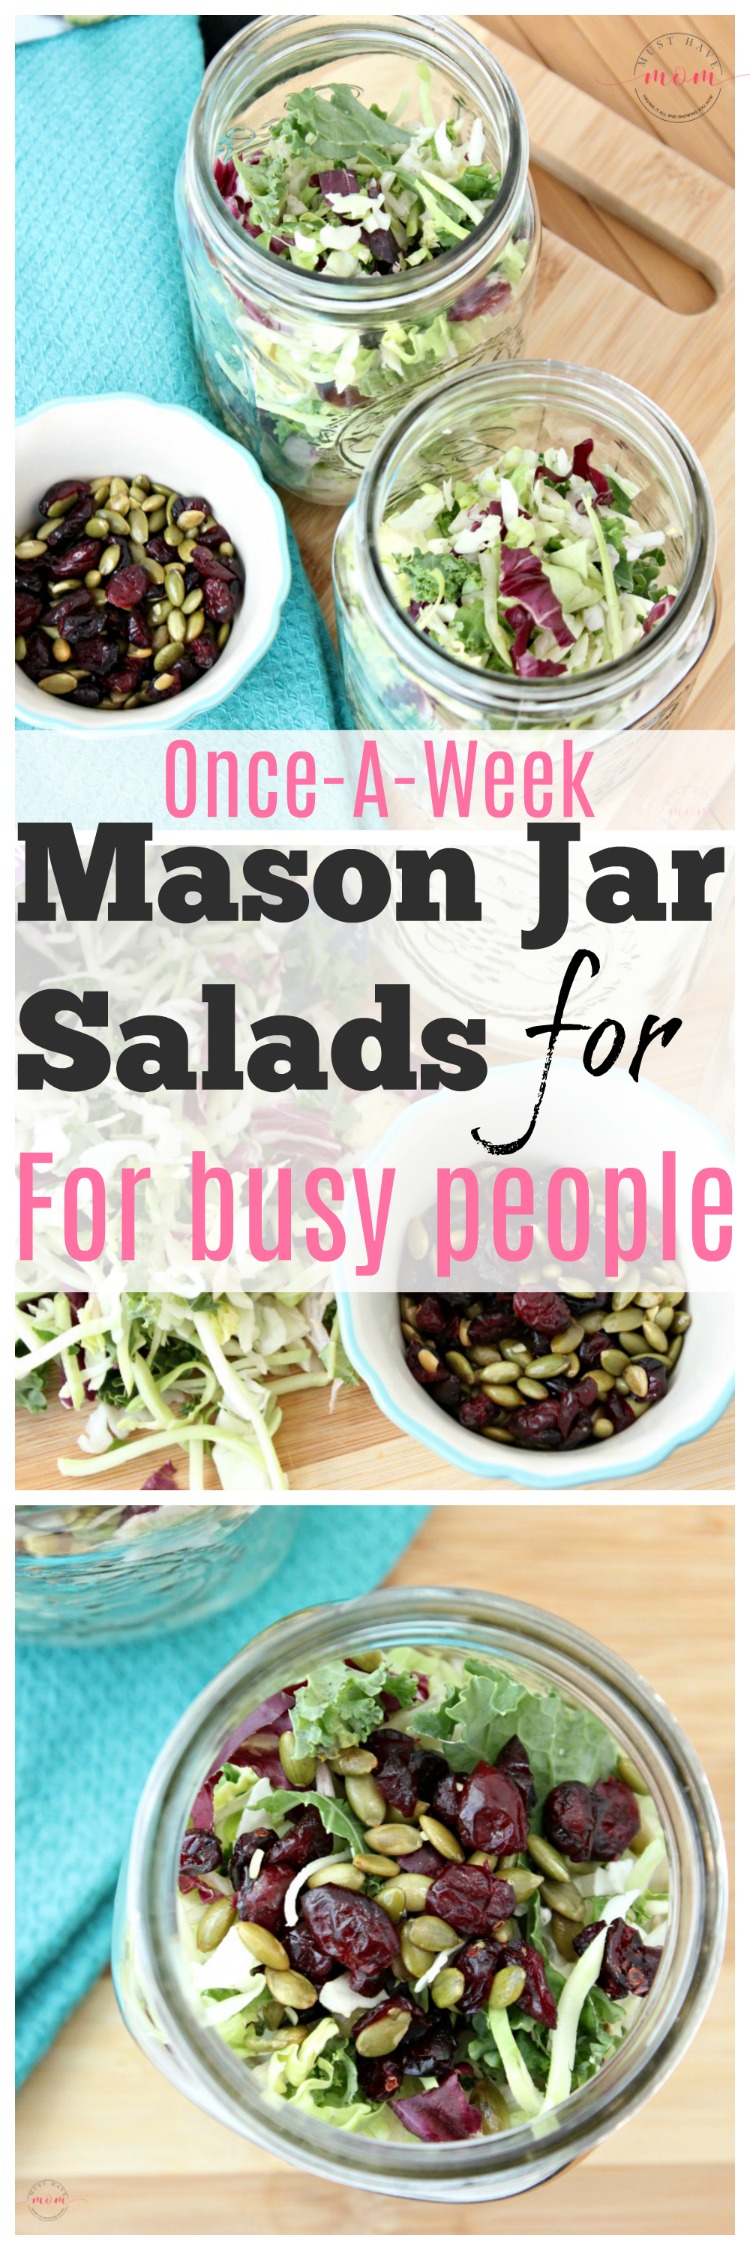 Once a week mason jar salads for busy people who like to eat healthy! Make on Sunday, lasts all week. Easy superfood kale salads.